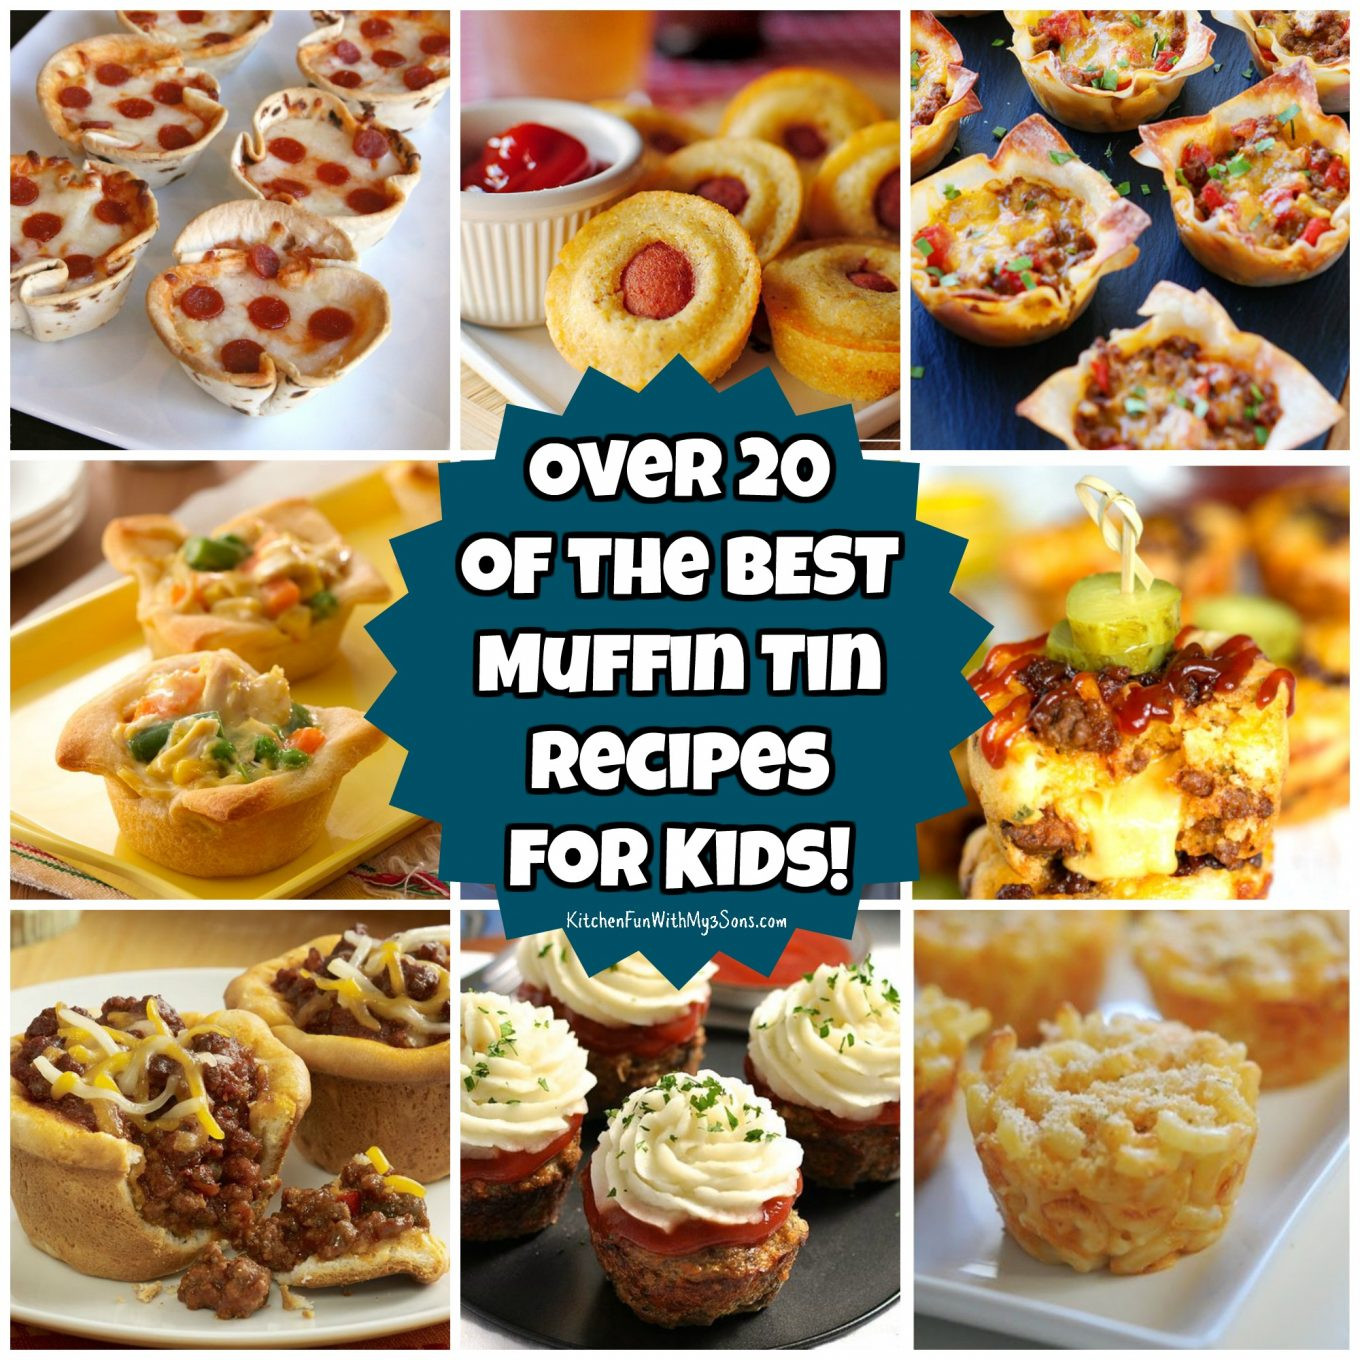 Recipes For Kids
 20 Muffin Tin Recipes for Kids Kitchen Fun With My 3 Sons